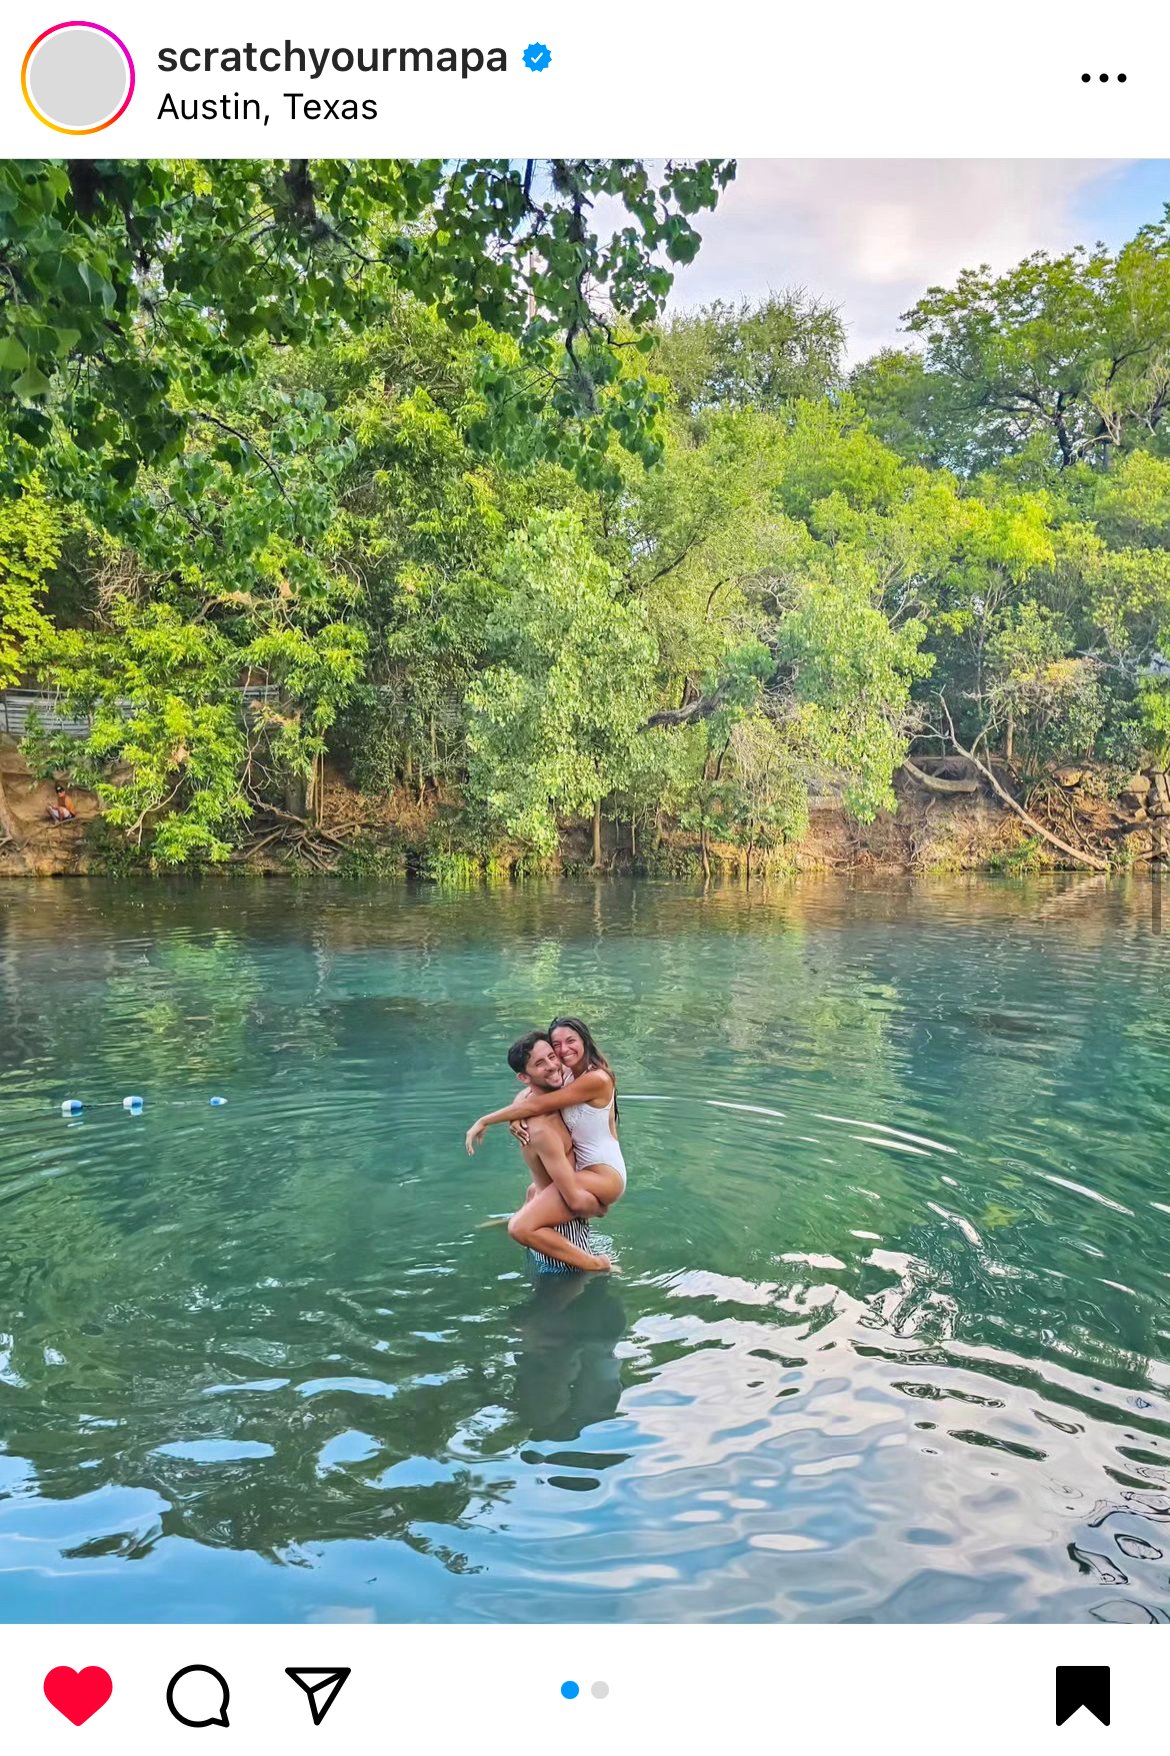 barton springs, cool places in texas to visit